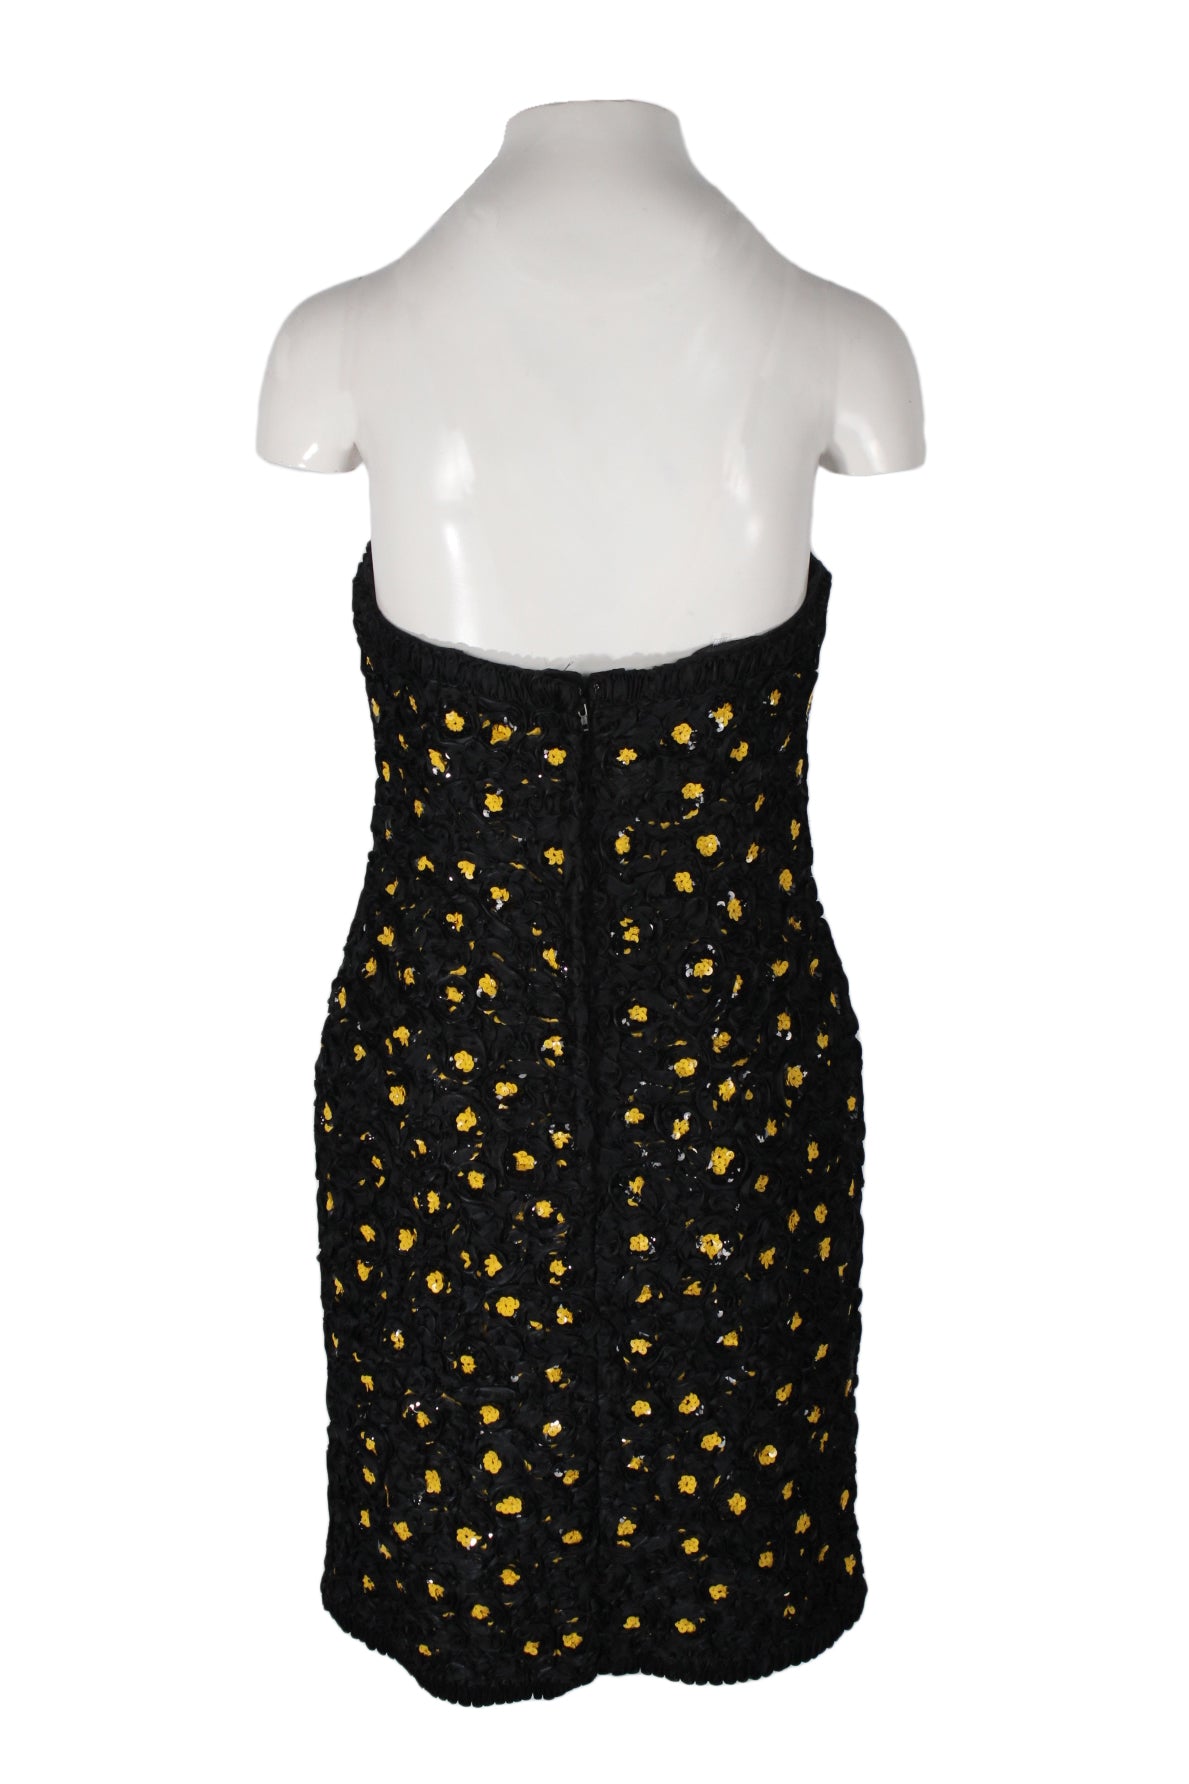 back view of victor costa black and yellow tube dress